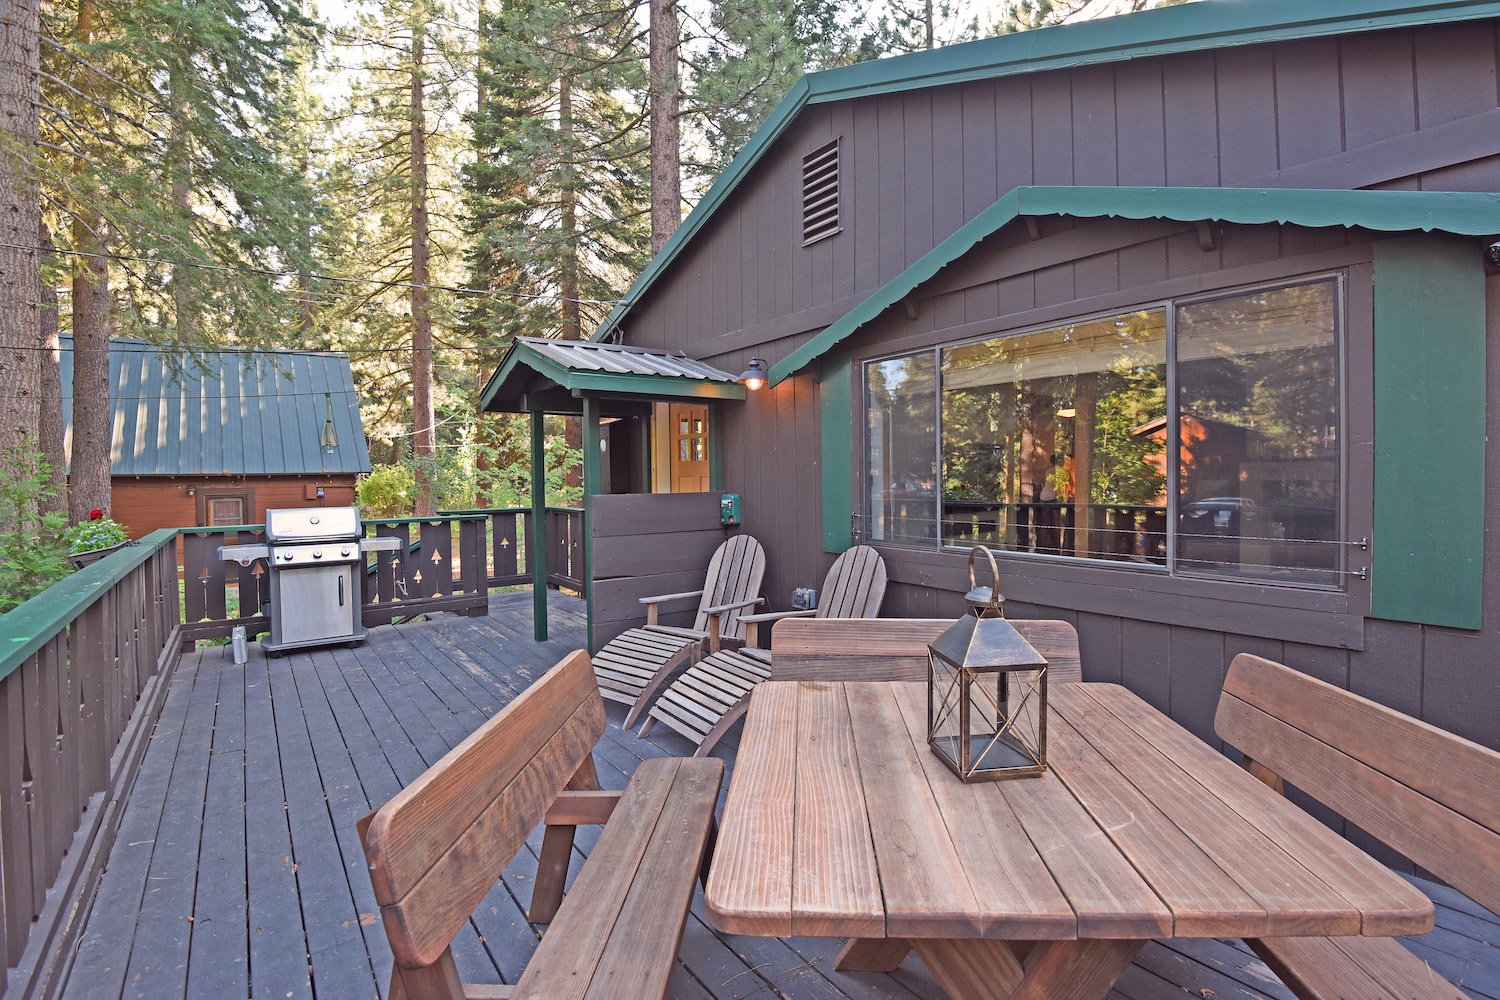 Enjoy outdoor dinners on the deck w/ picnic table and gas BBQ